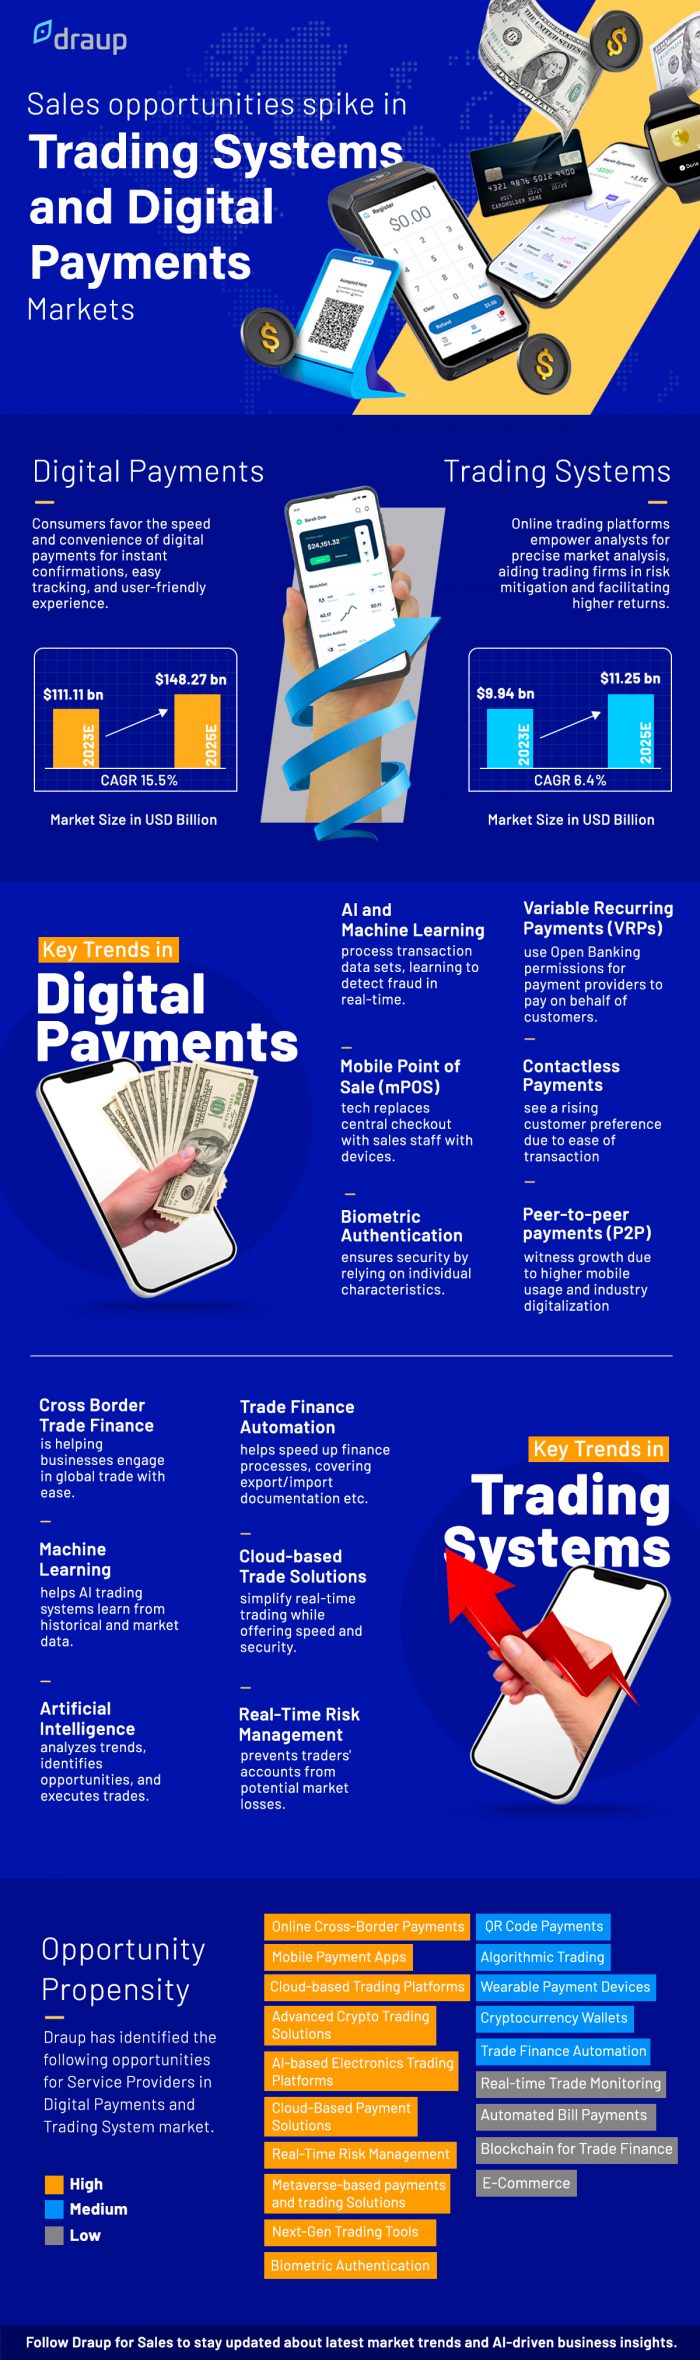 Sales Opportunities Spike in Trading Systems and Digital Payments Market